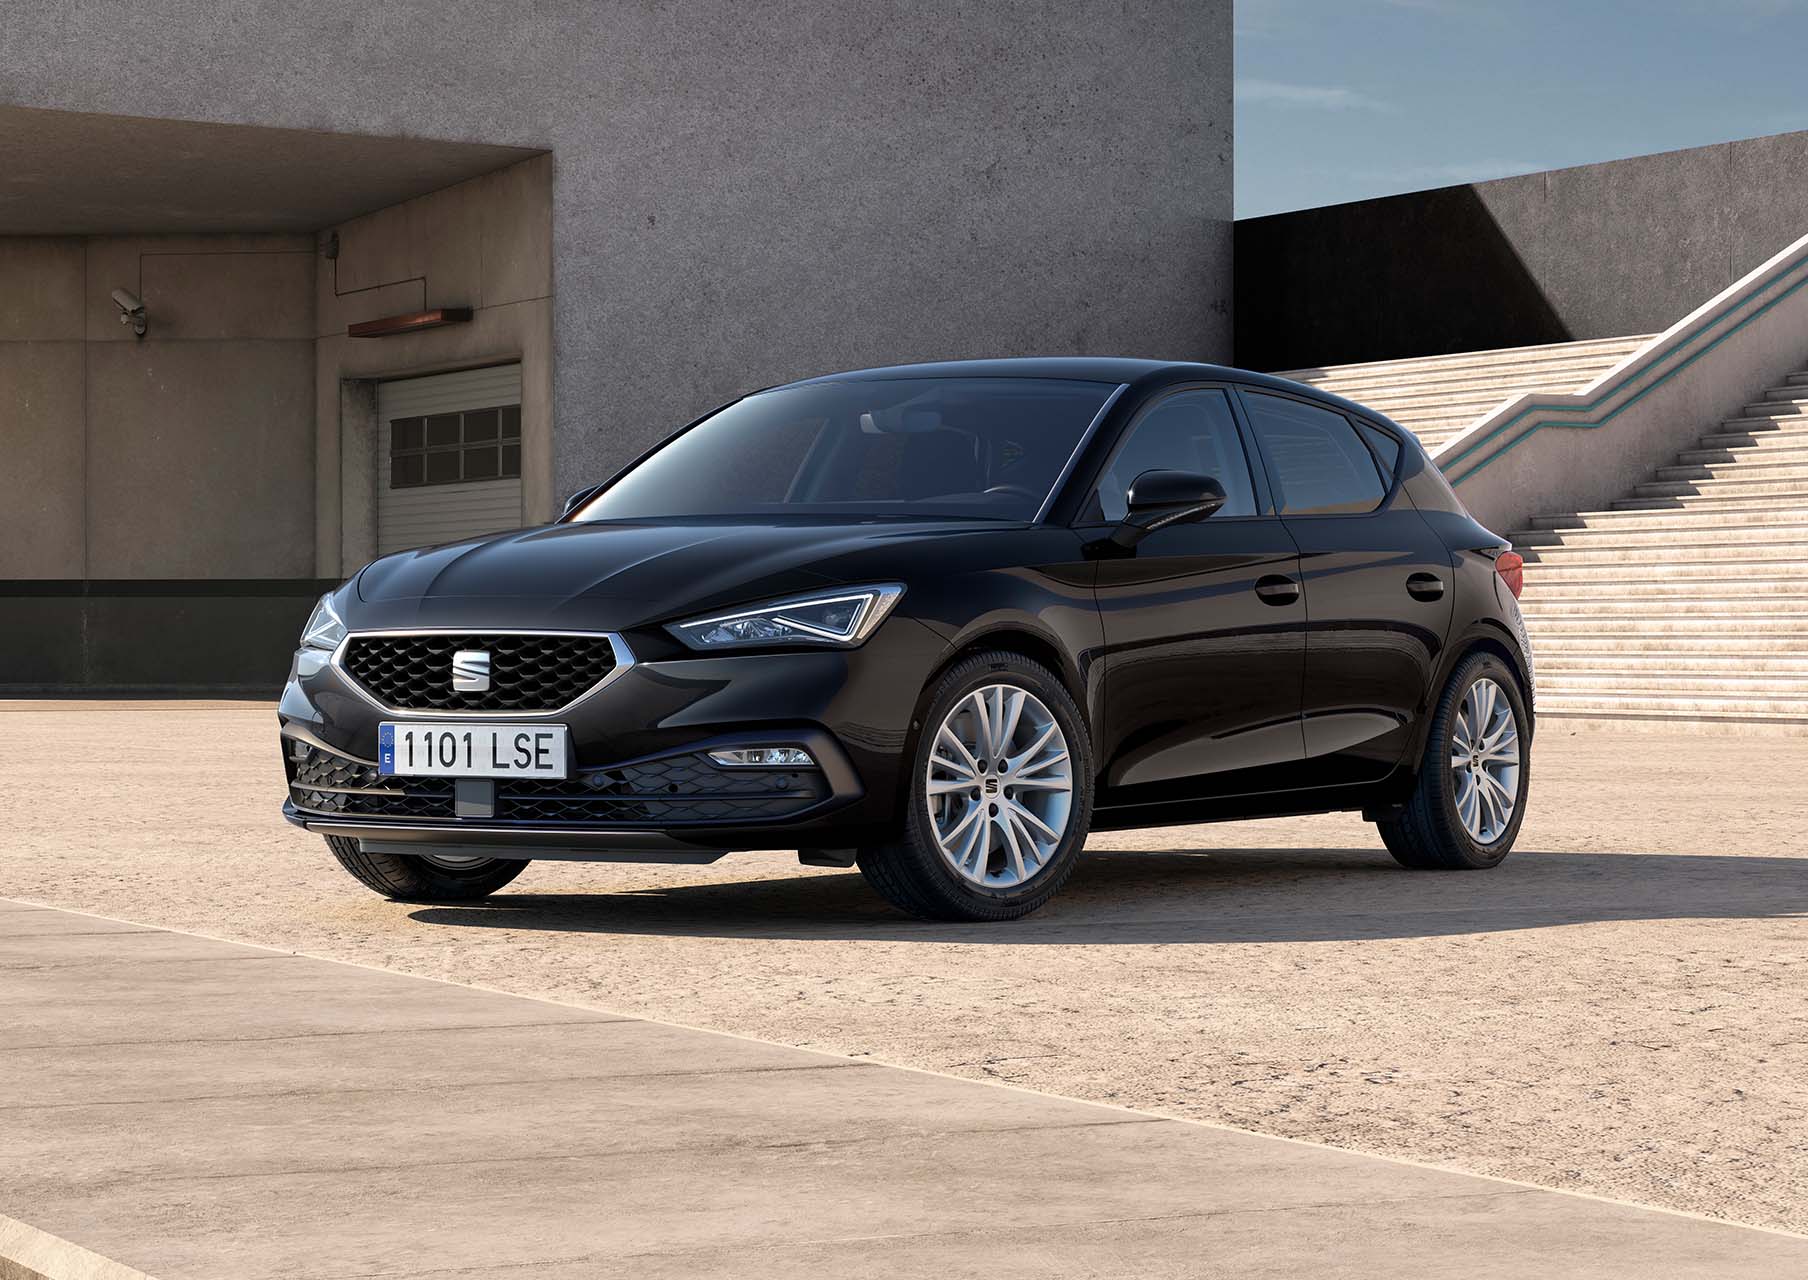 seat leon 5d style trim midnight black colour with dynamic alloy wheels parked